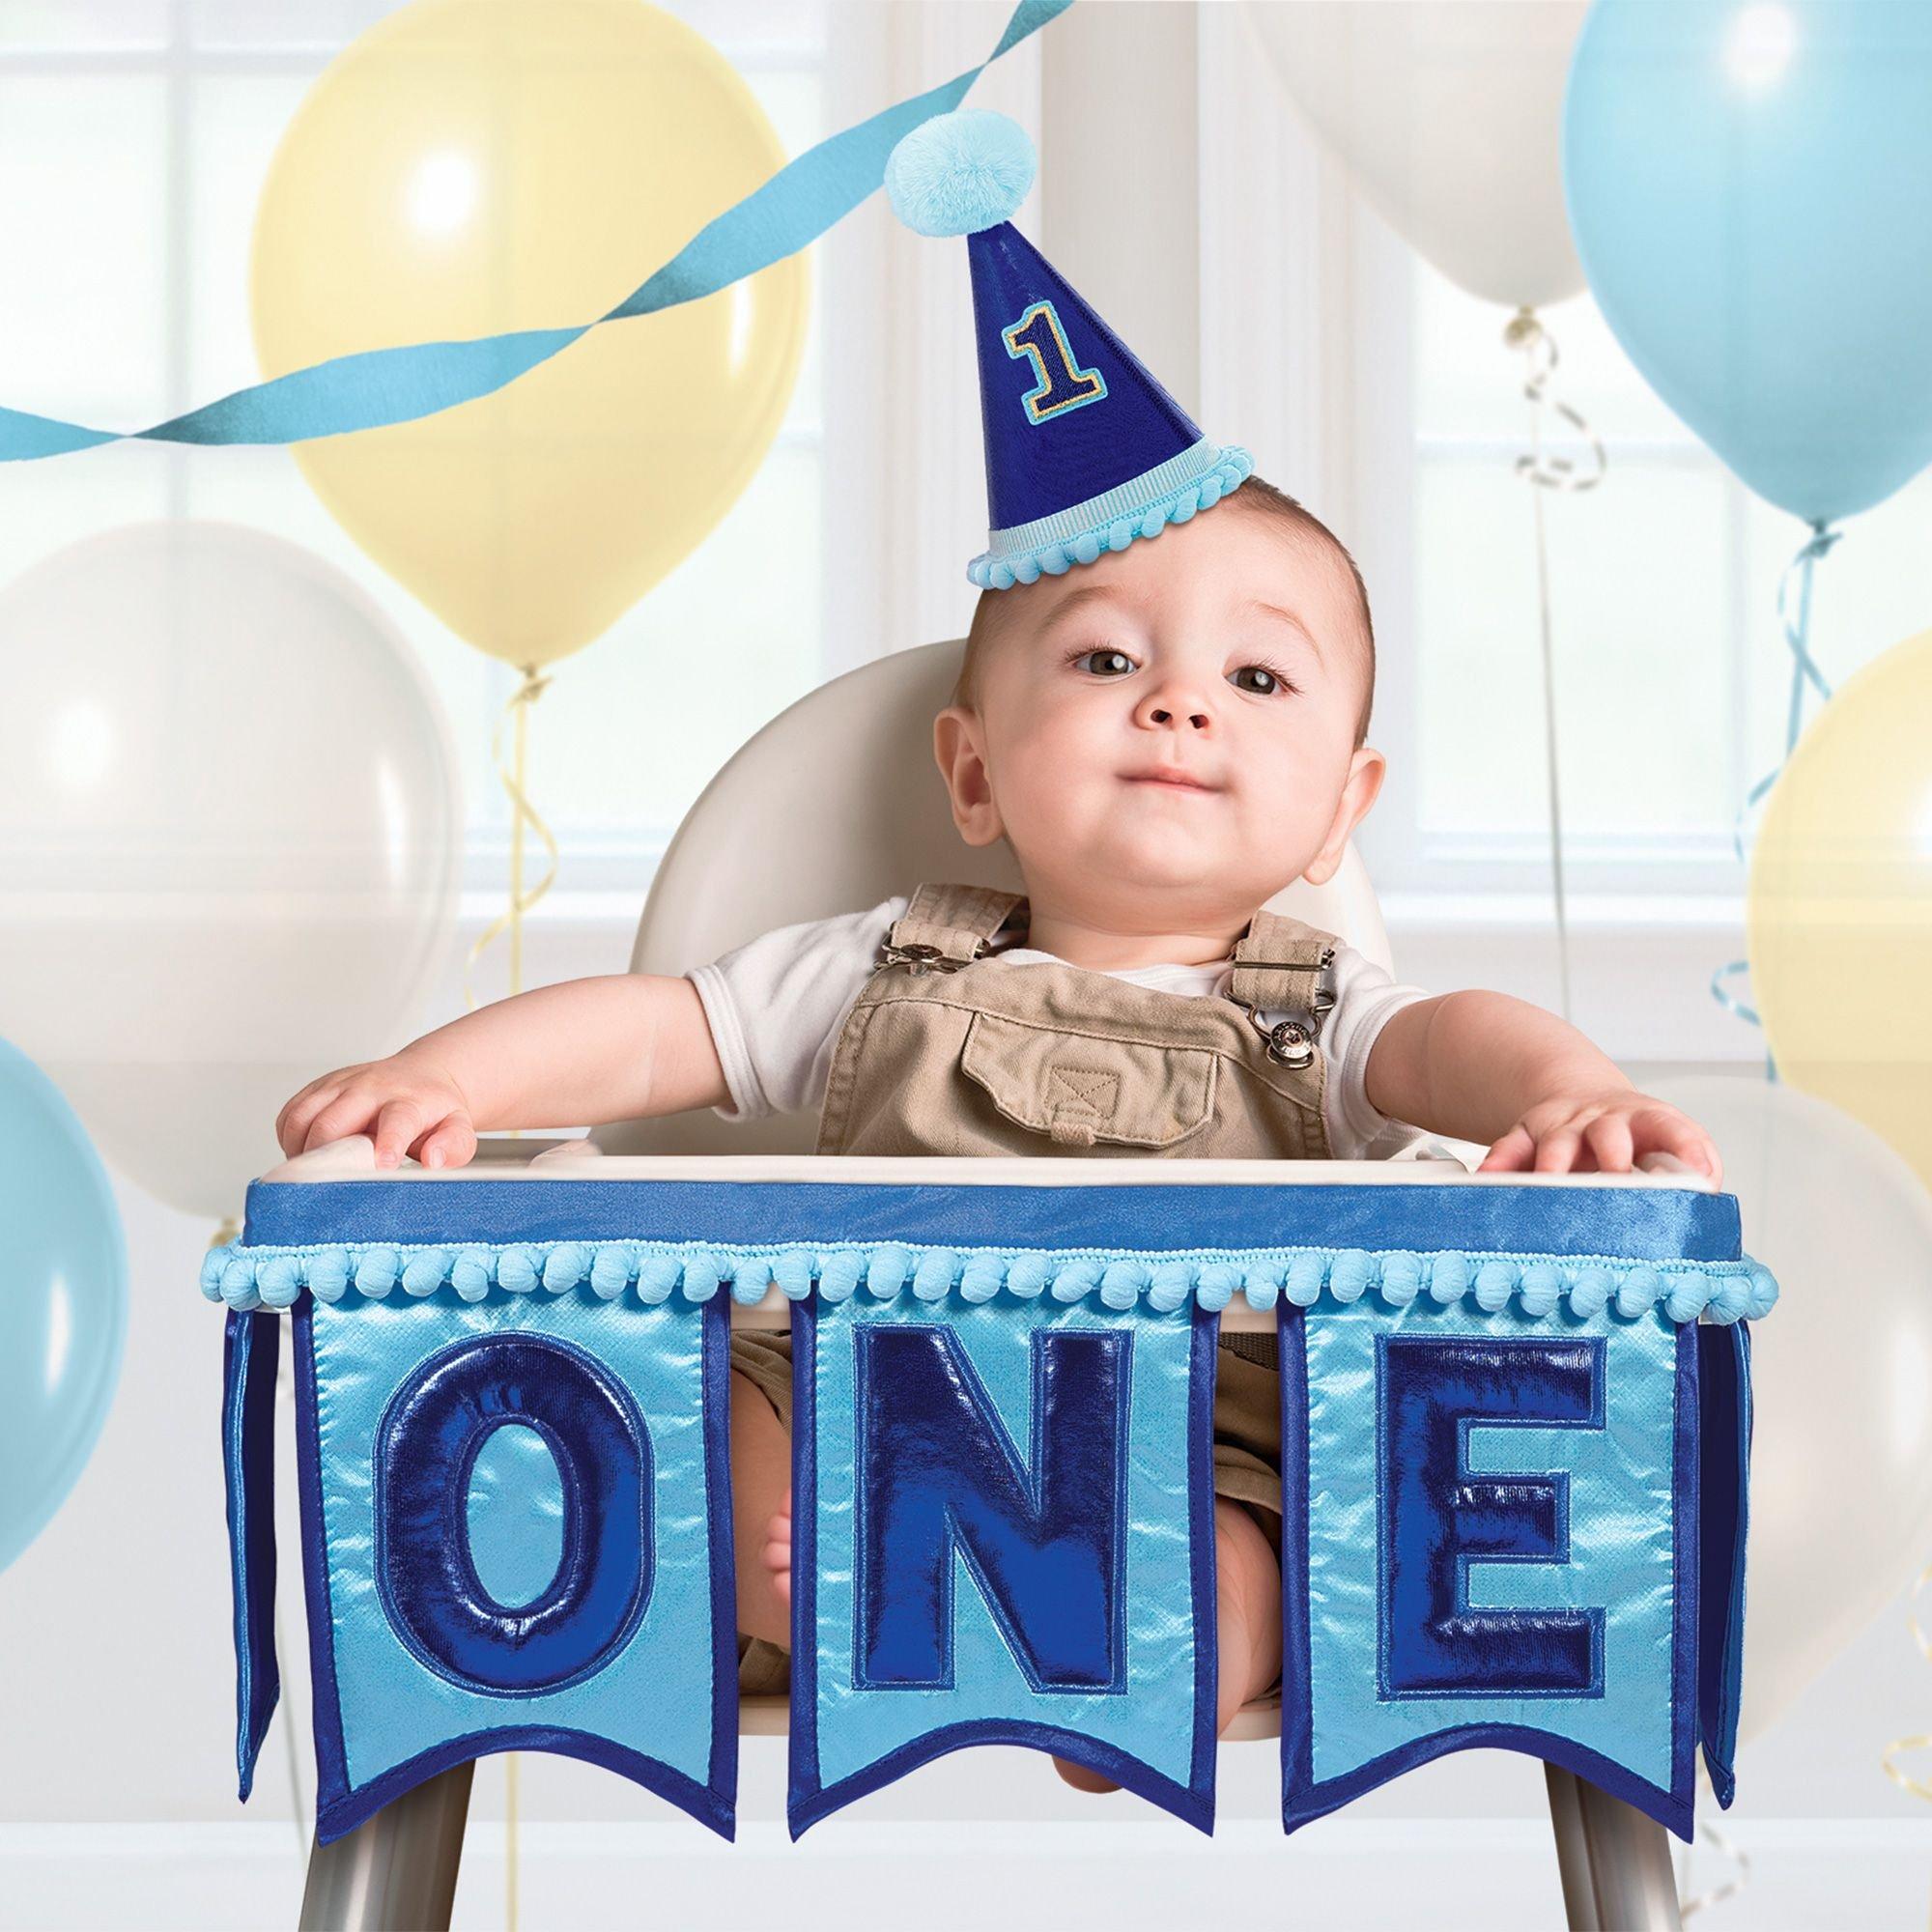 Baby Boy 1st Birthday Decorations , Baby First Birthday Decorations for  Boy,Boys 1st Birthday Party Supplies,1st Birthday Ballon Boxes,High Chair